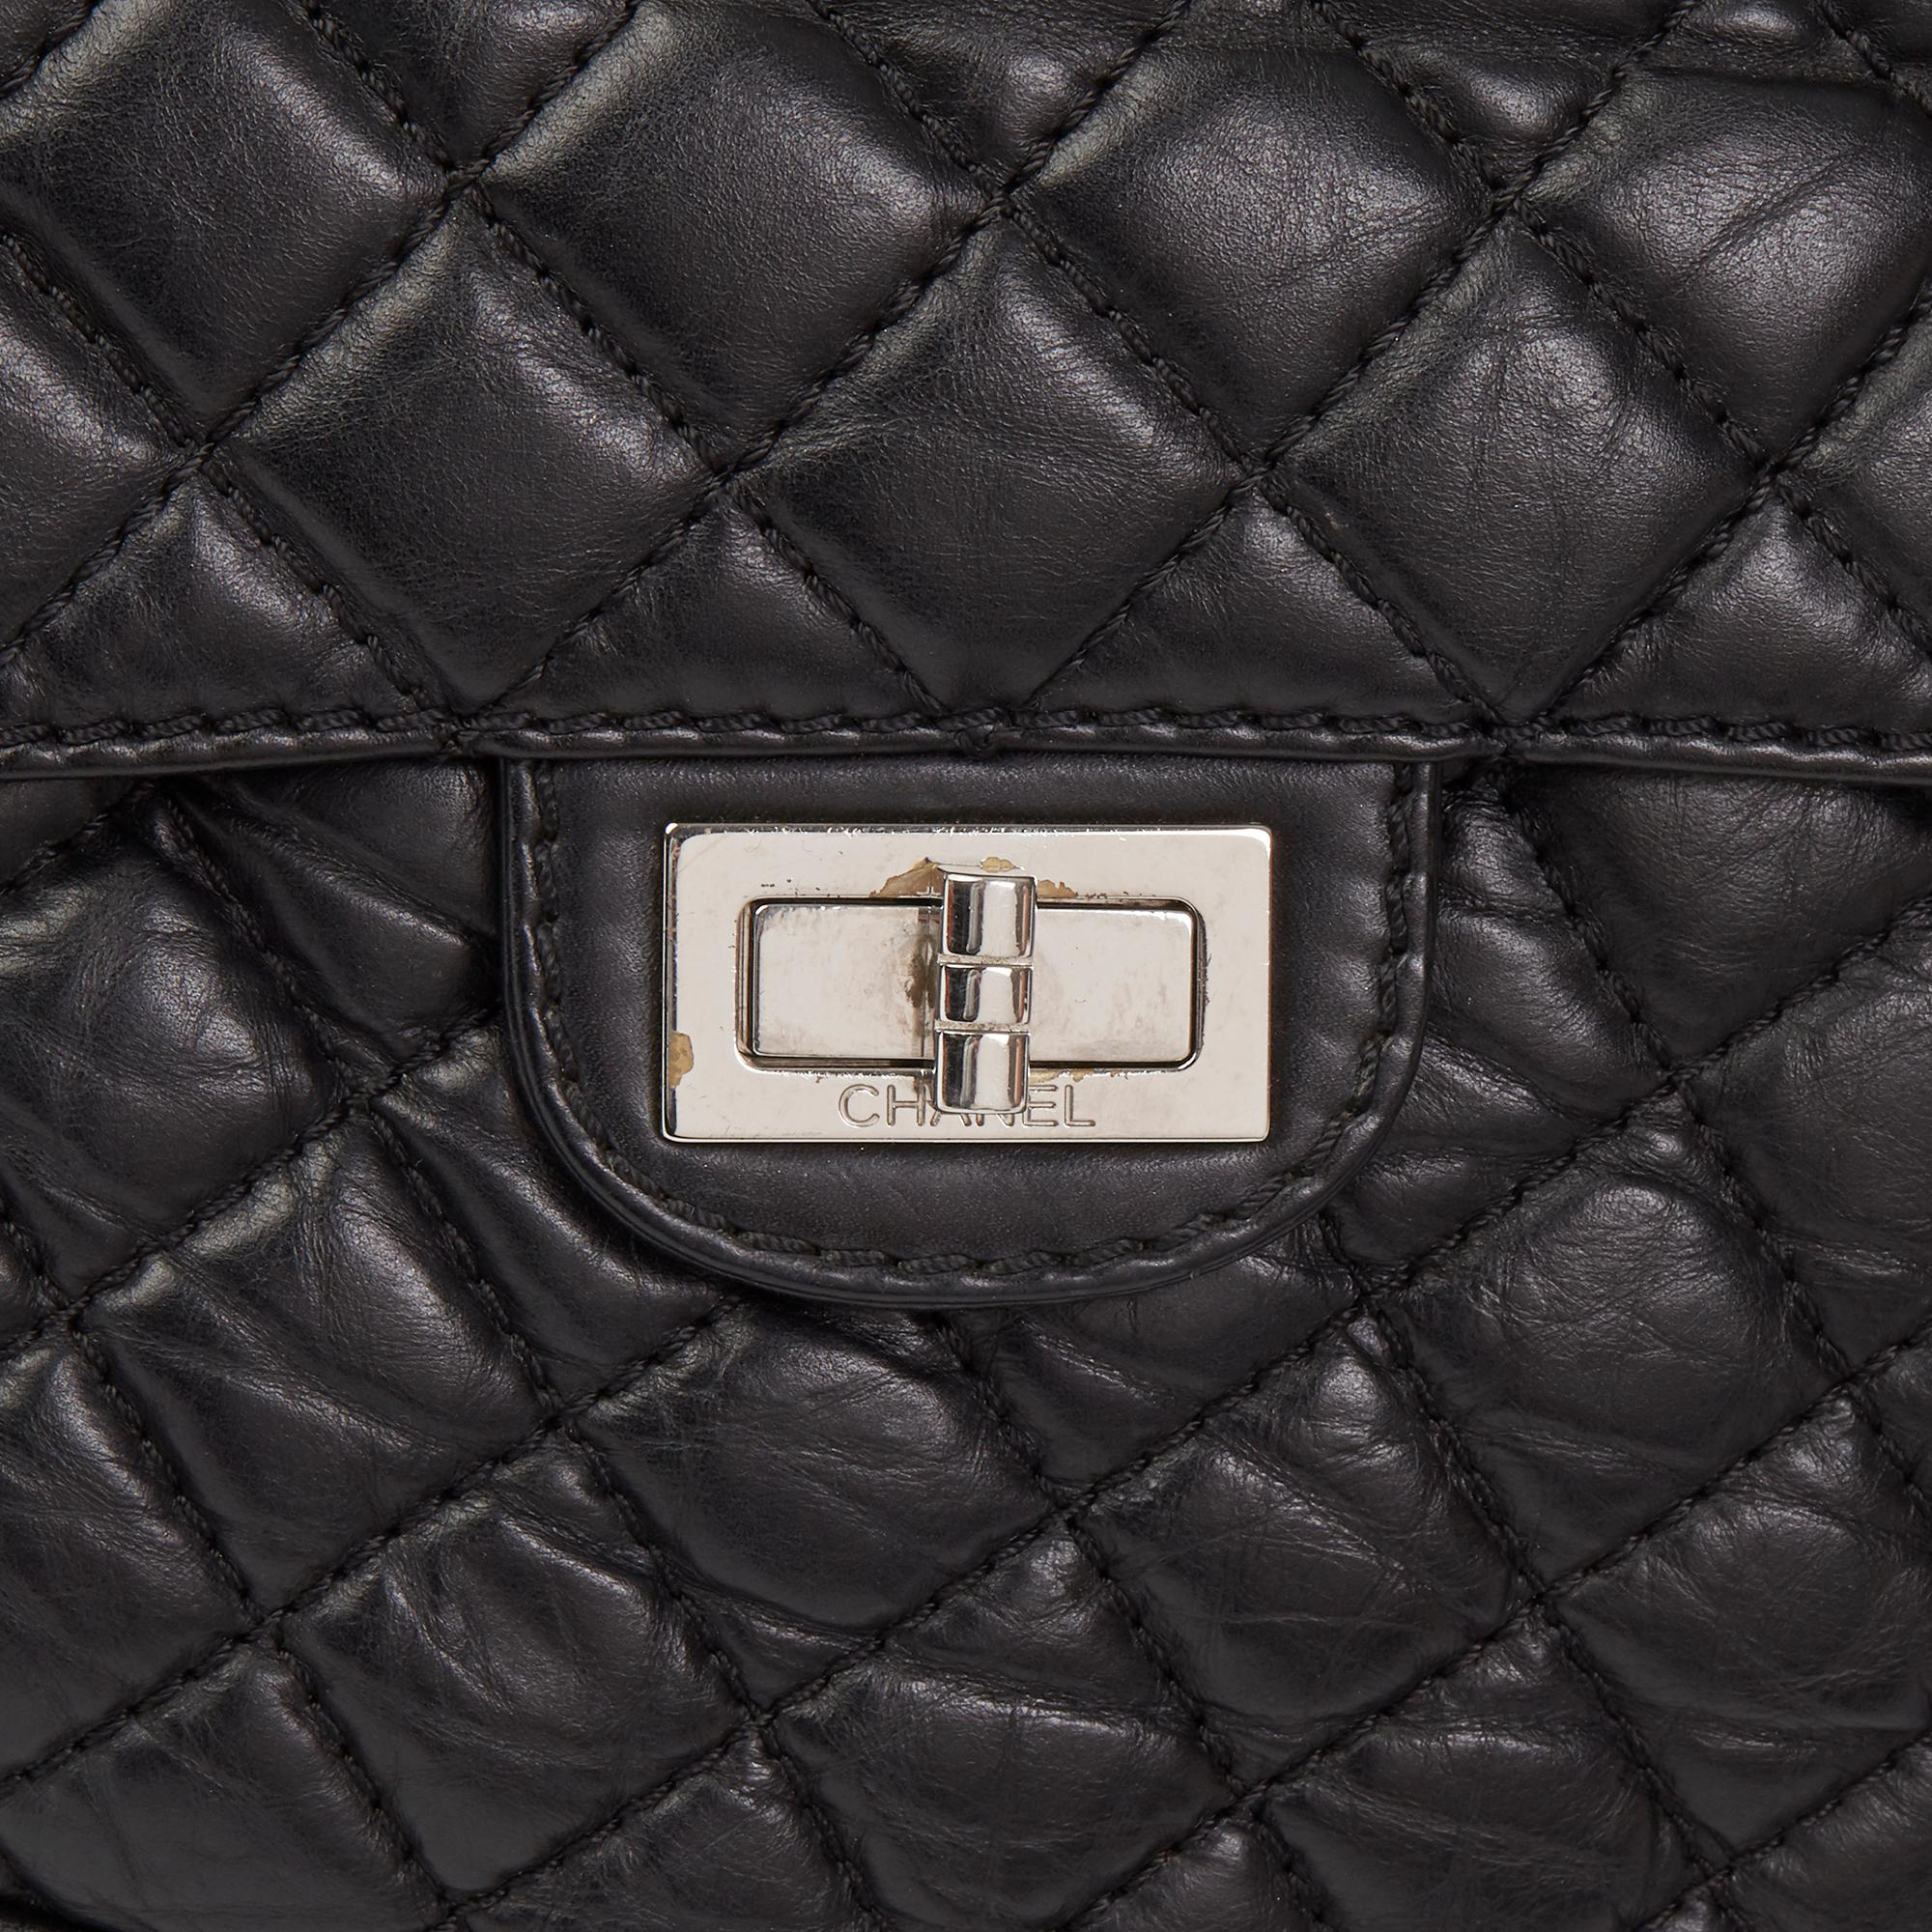 2010 Chanel Black Quilted Aged Calfskin Leather Fantasy Shopping Tote 3